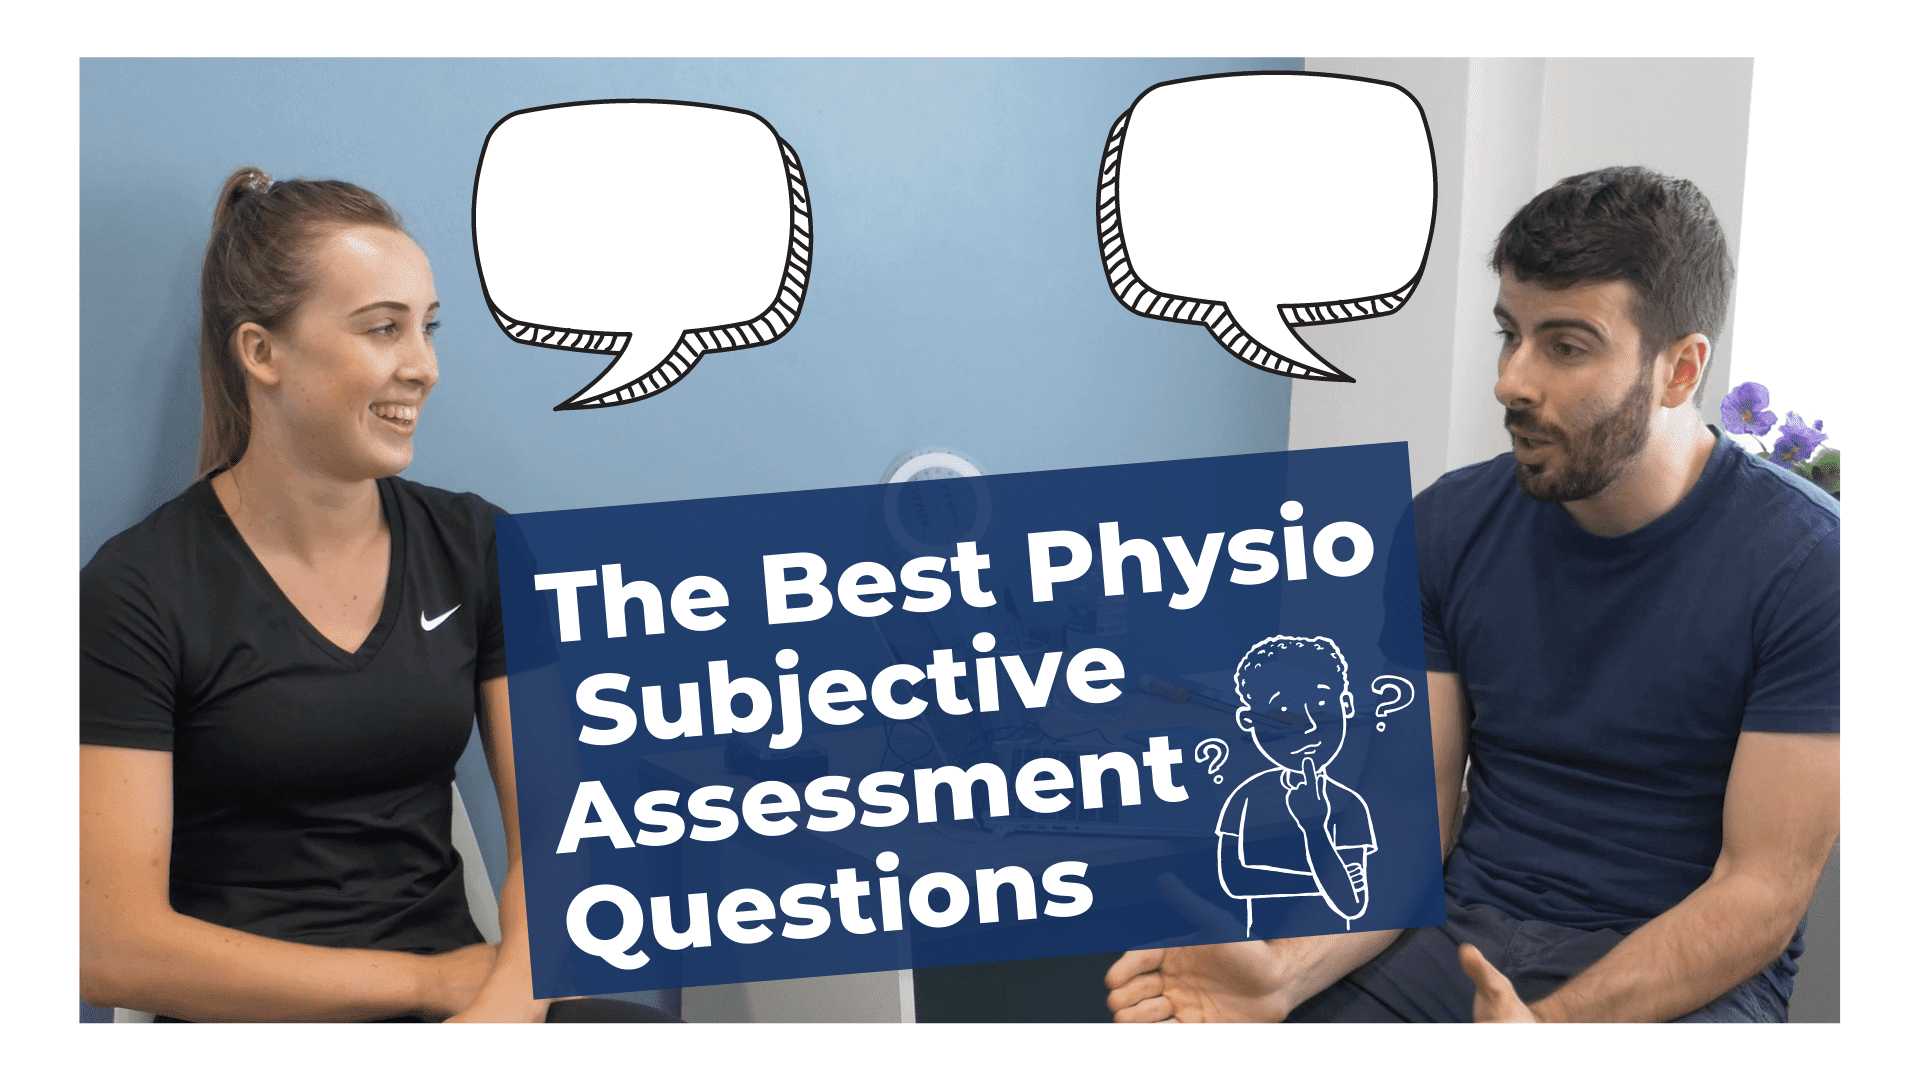 The Best Subjective Assessment Physiotherapy Question To Ask